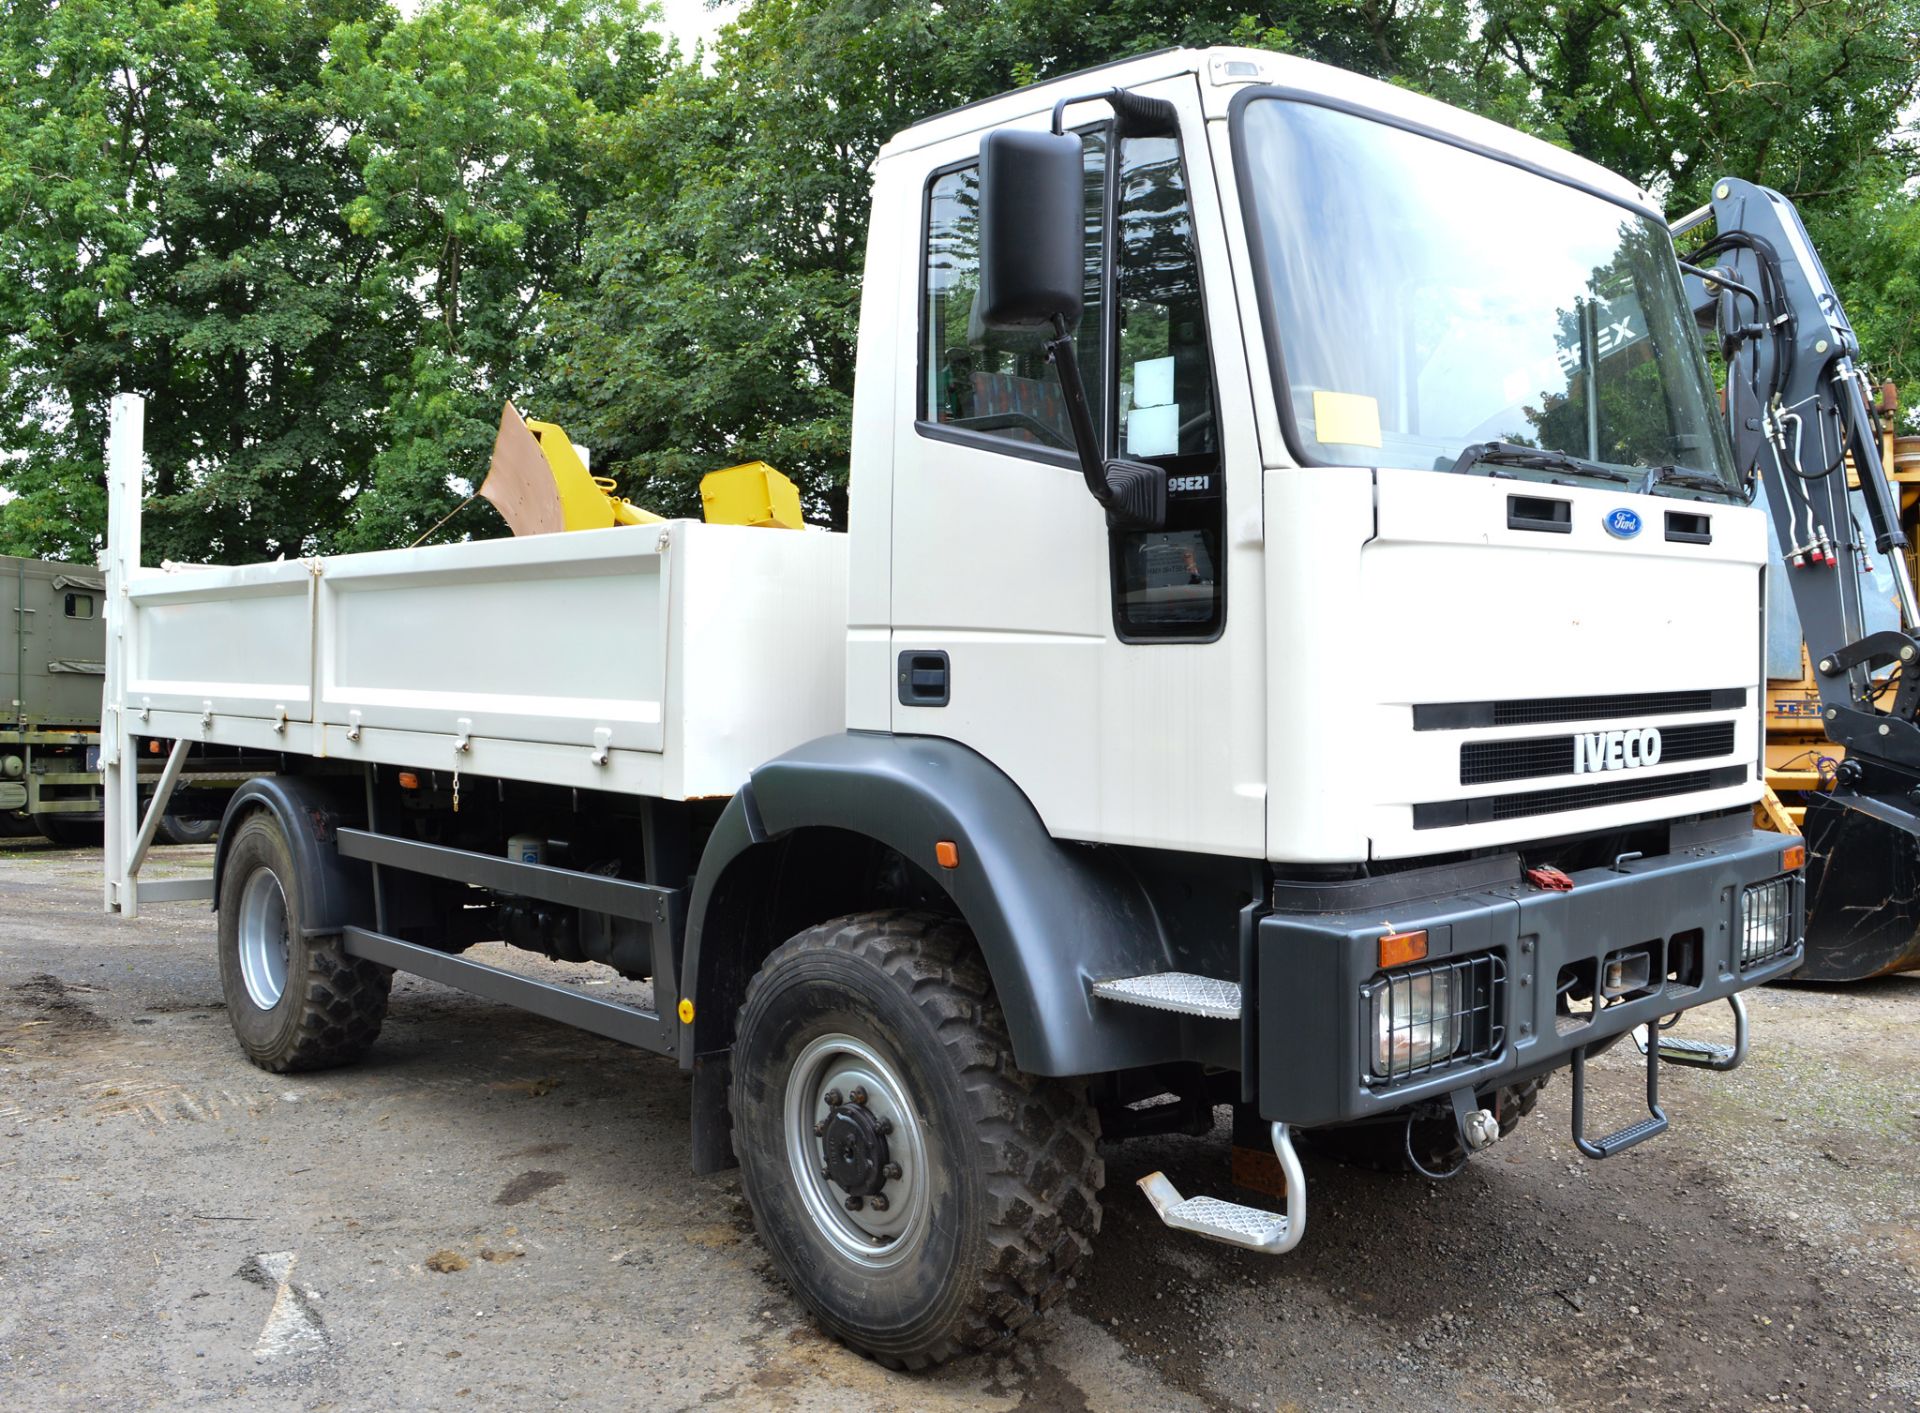 Ford Iveco 95E21 4x4 dropside lorry (Ex MOD) Registration Number: Y969 XGV Date of Registration: